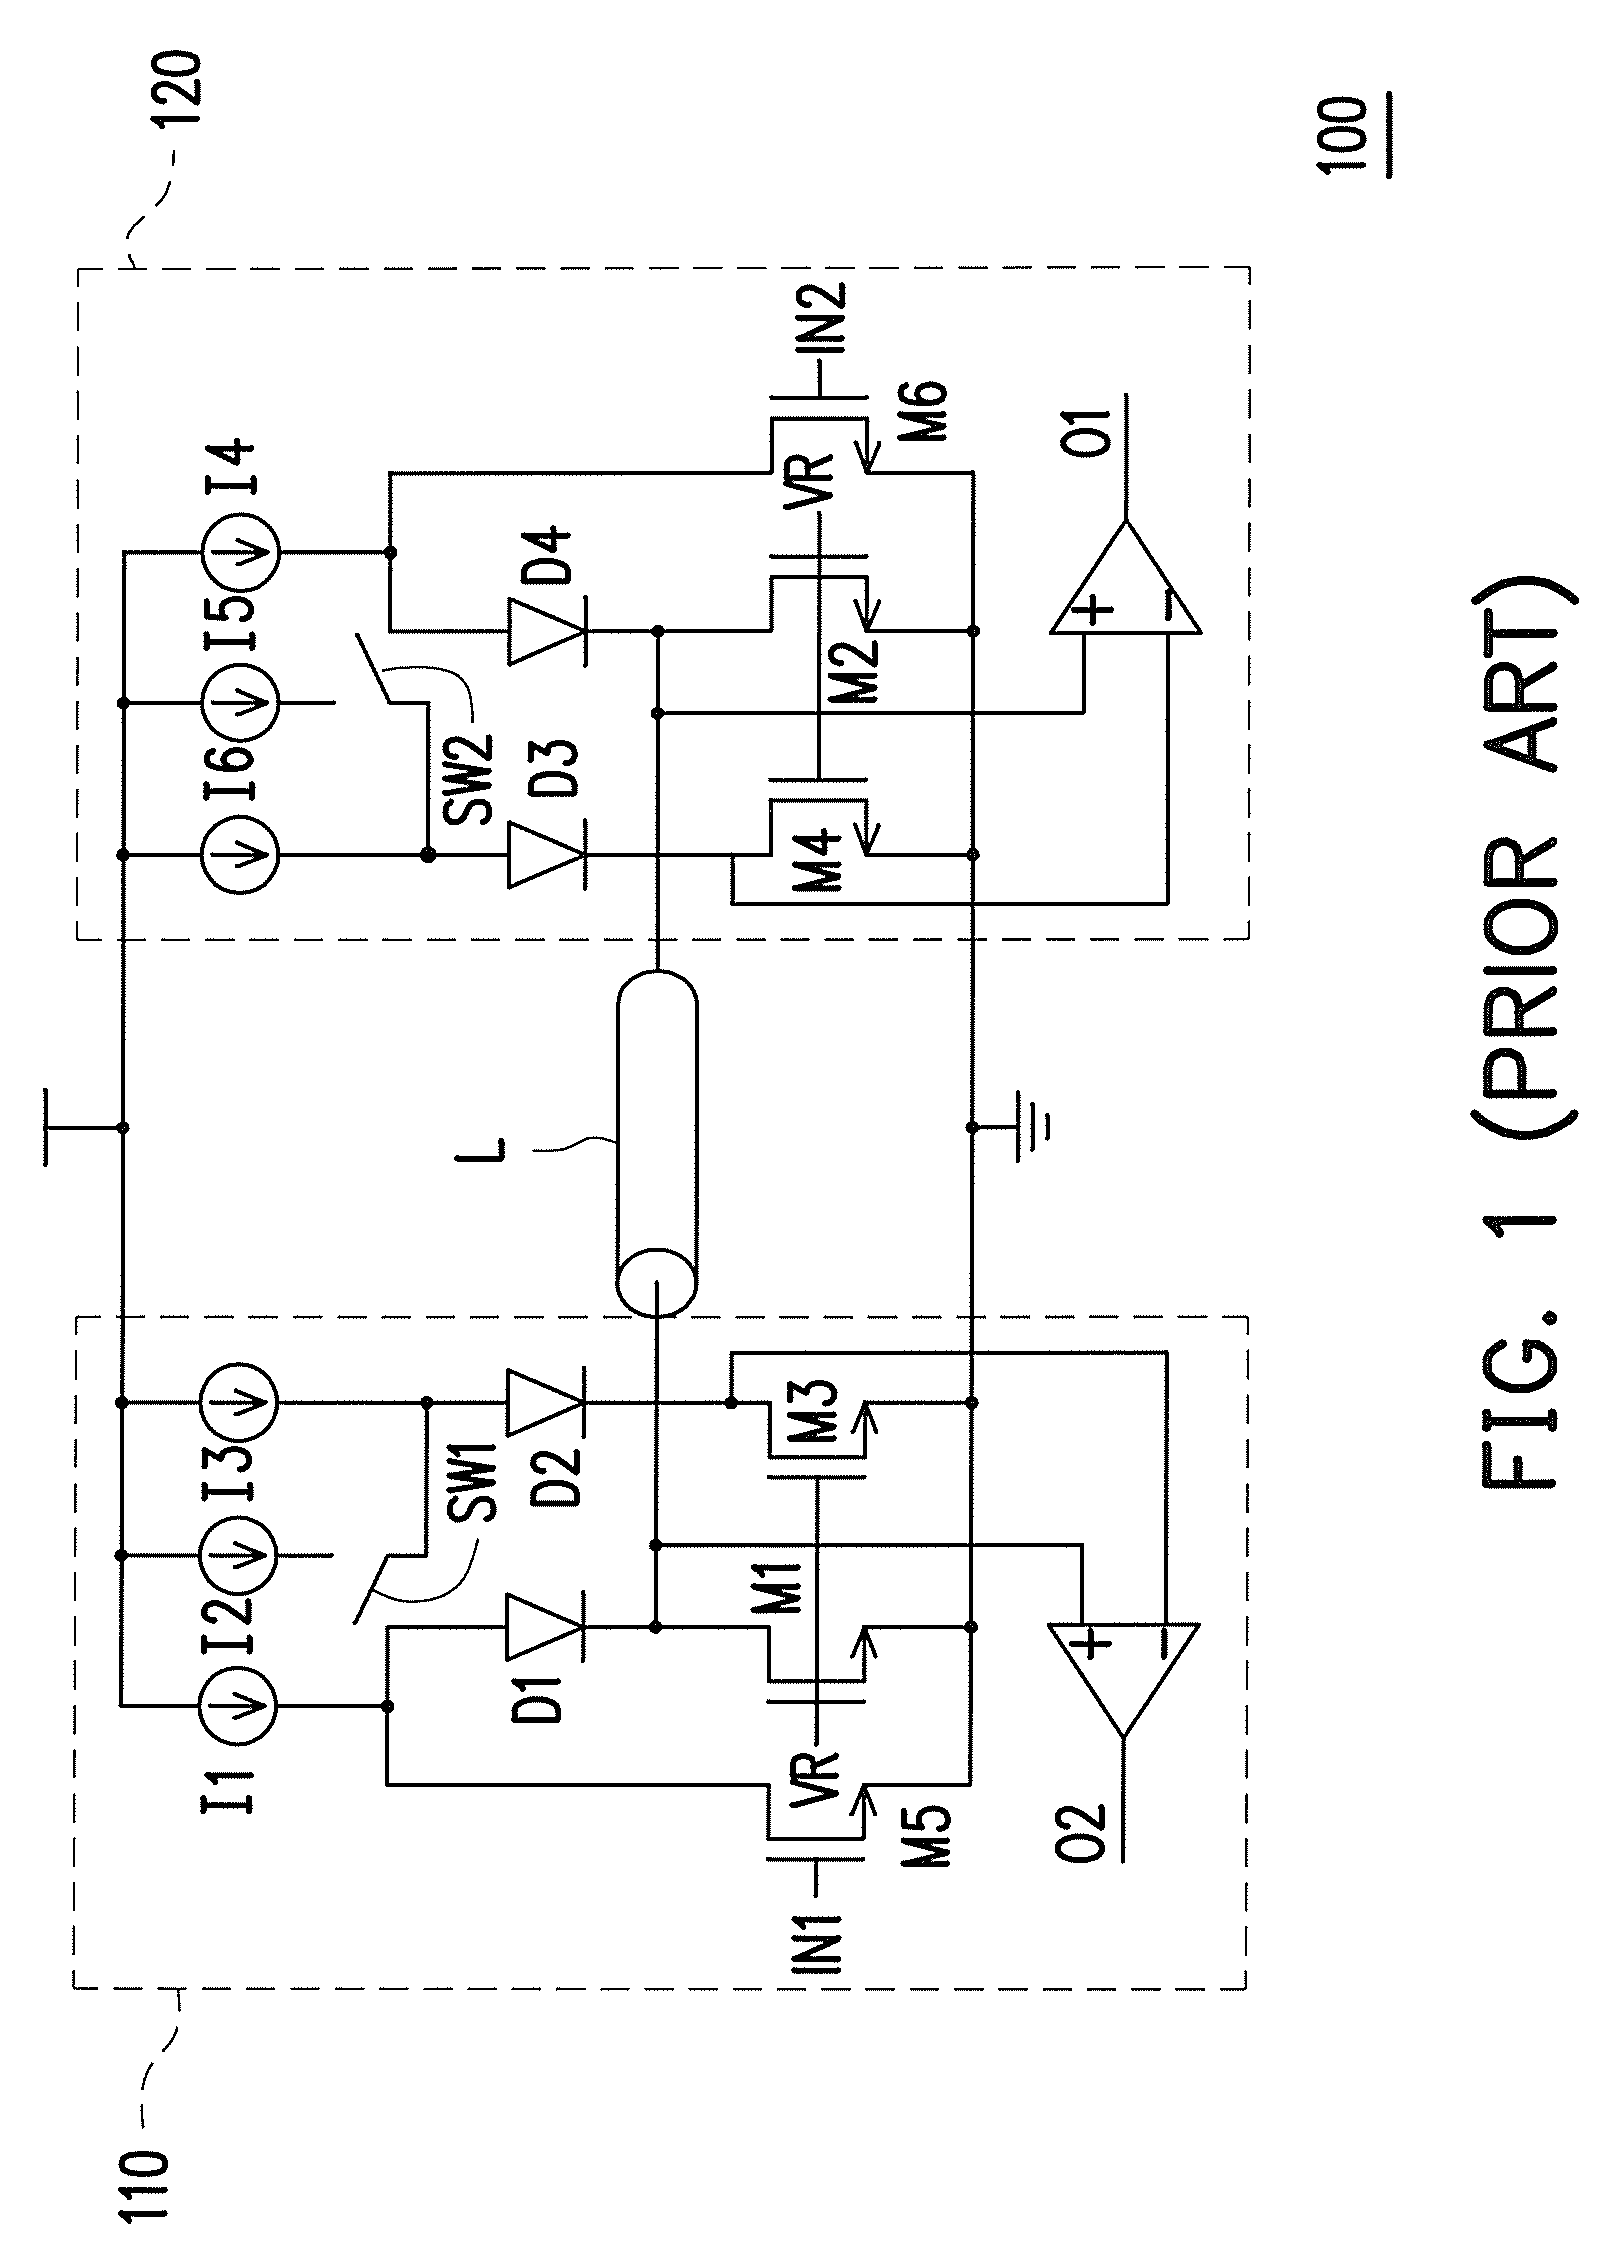 Signal transceiver apparatus and system